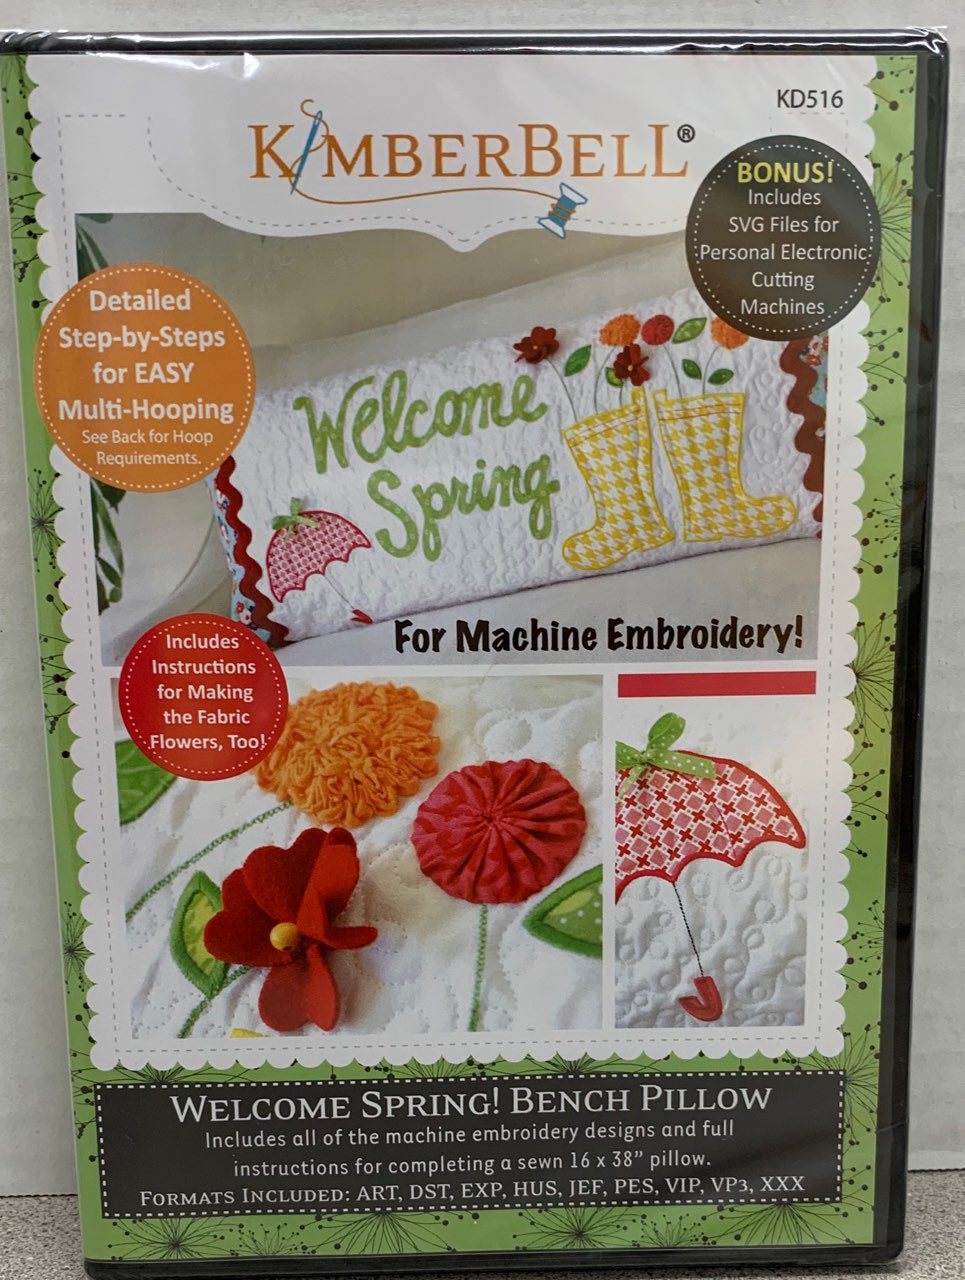 Kimberbell - CD - Welcome Spring! Bench Pillow - Machine Embroidery